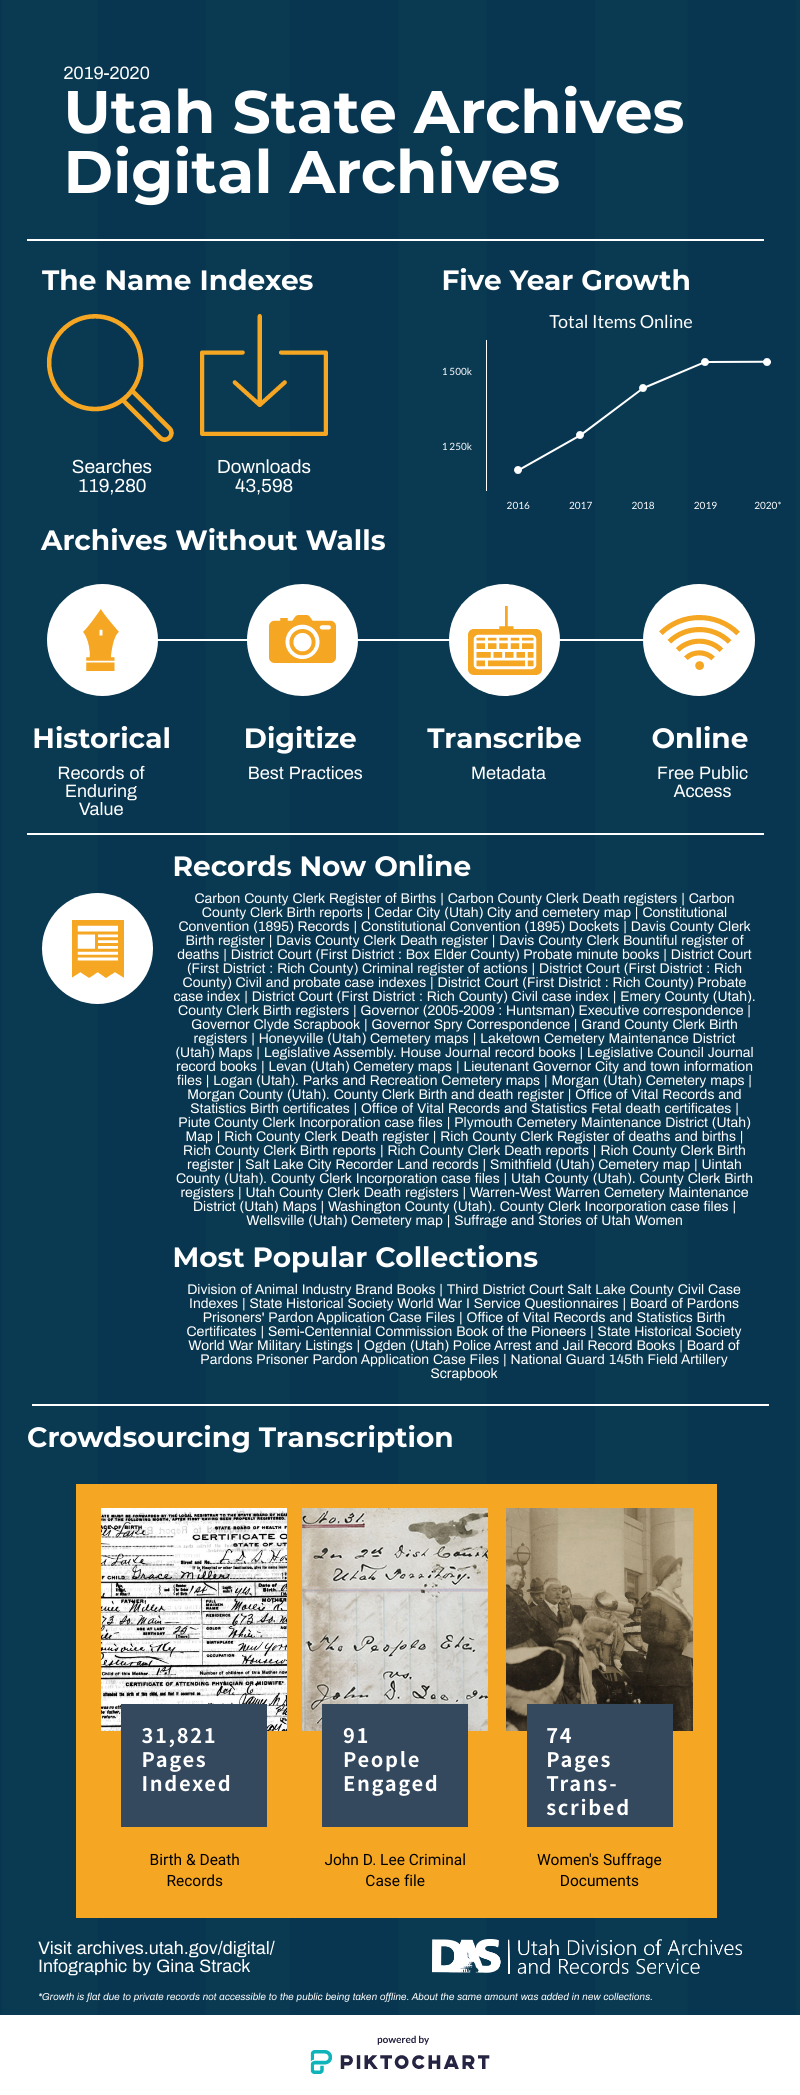 Infographic for 2019-2020 showing statistics and information for digital collections.